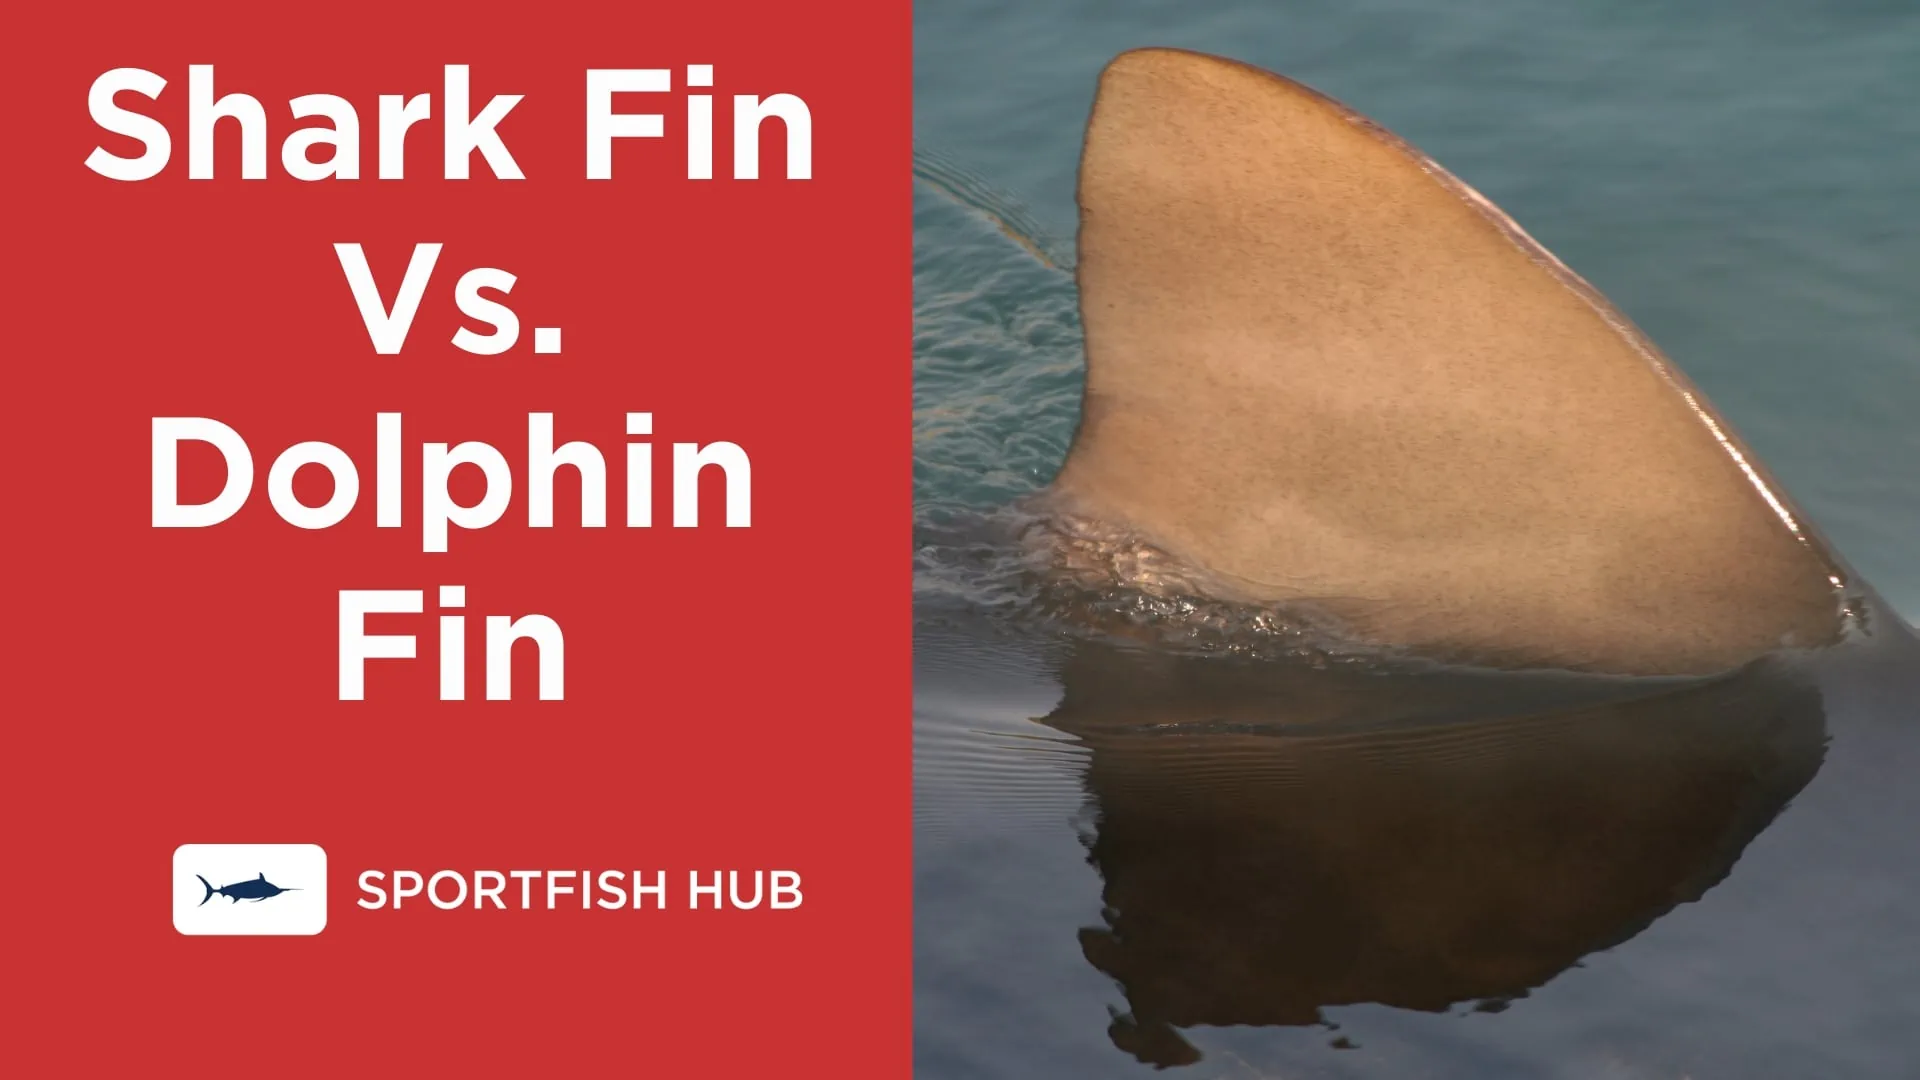 How To Tell the Difference Between Shark Fins and Dolphin Fins